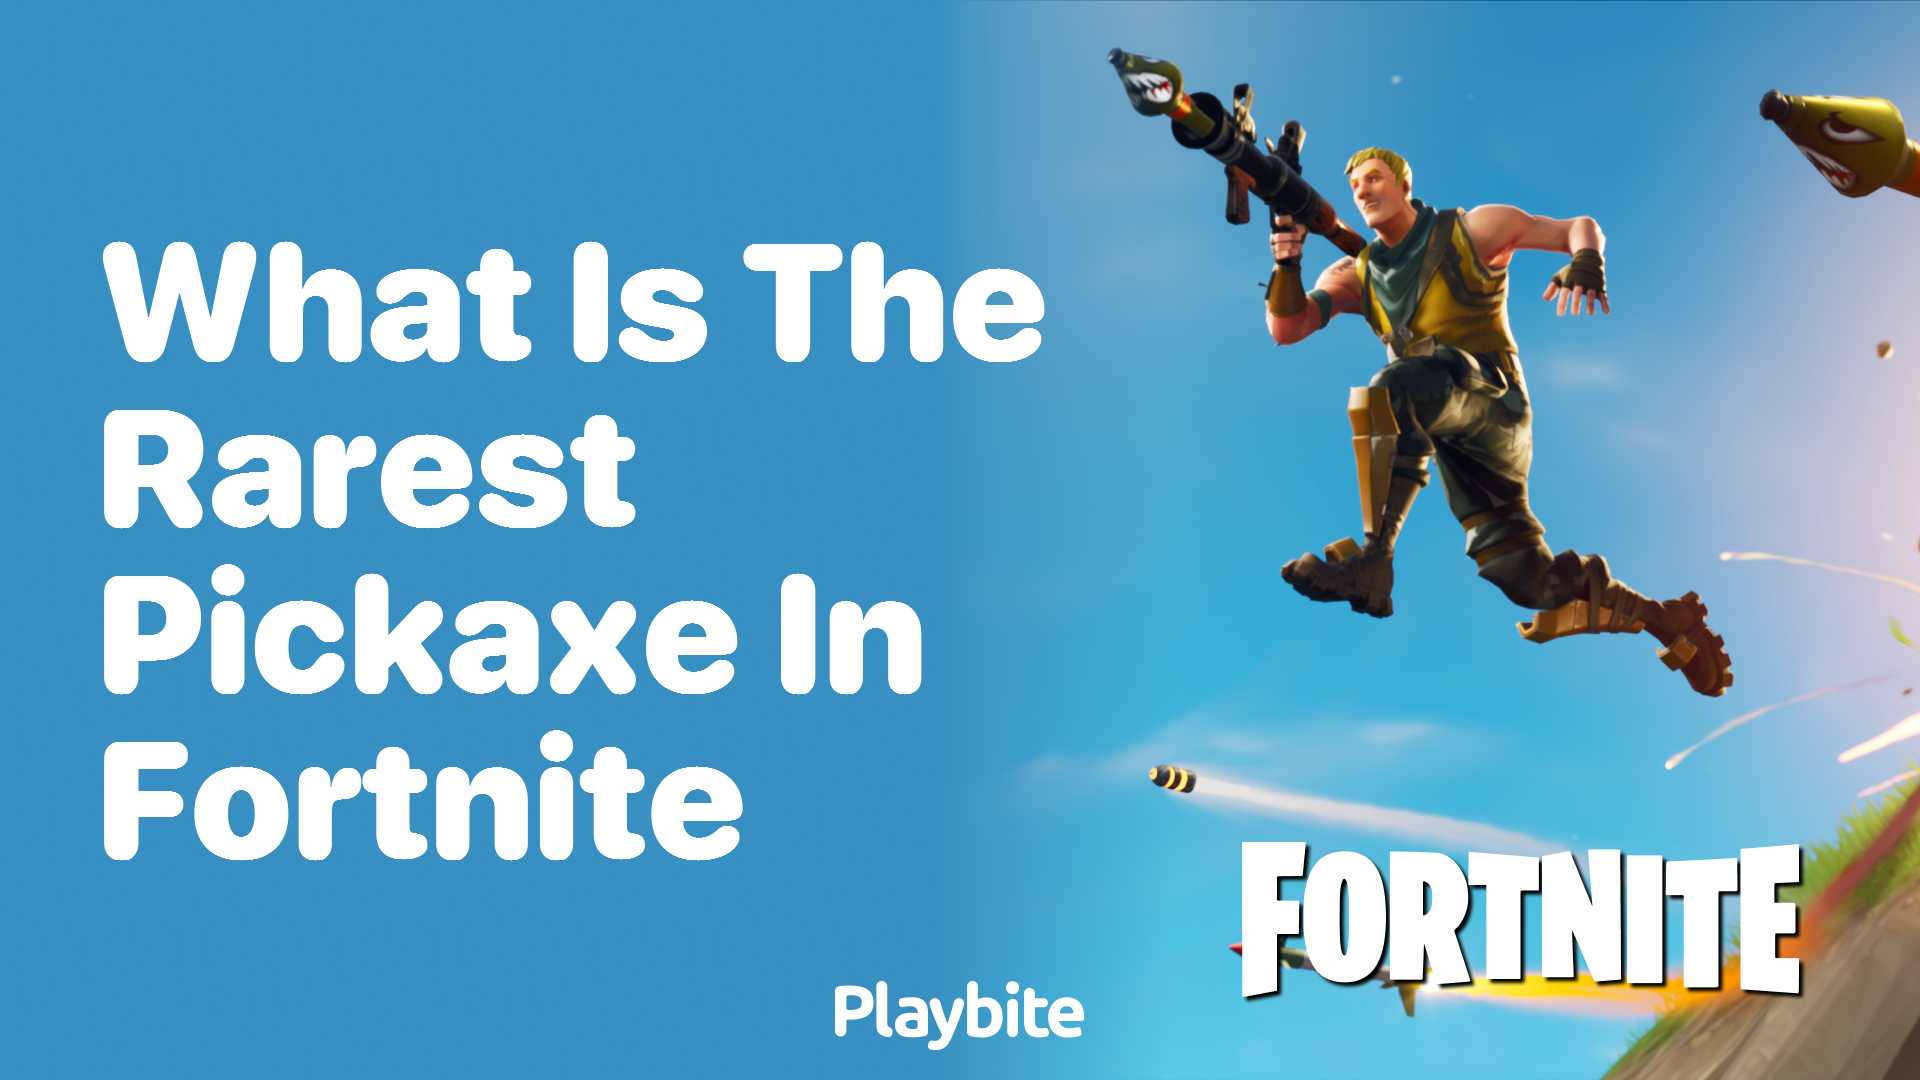 What Is the Rarest Pickaxe in Fortnite?